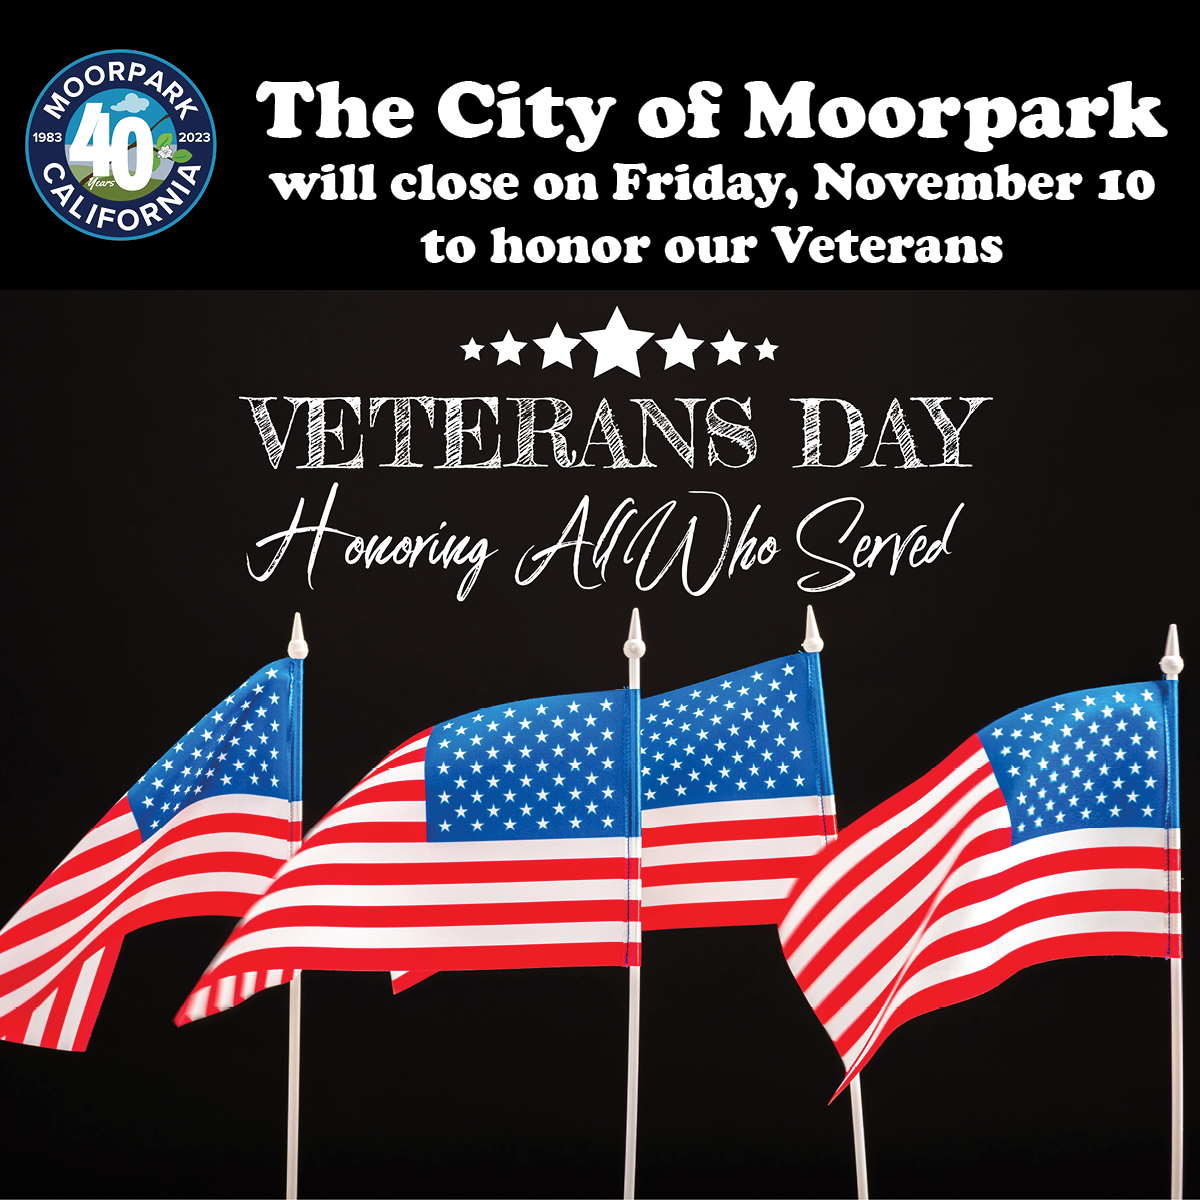 In honor of Veteran's Day, City of Moorpark offices will be closed on Friday, November 10th. A big thanks go out to all our veterans for their service! We will be back Monday, Nov. 13 and welcome you to come see us during our normal business hours. moorparkca.gov/hours